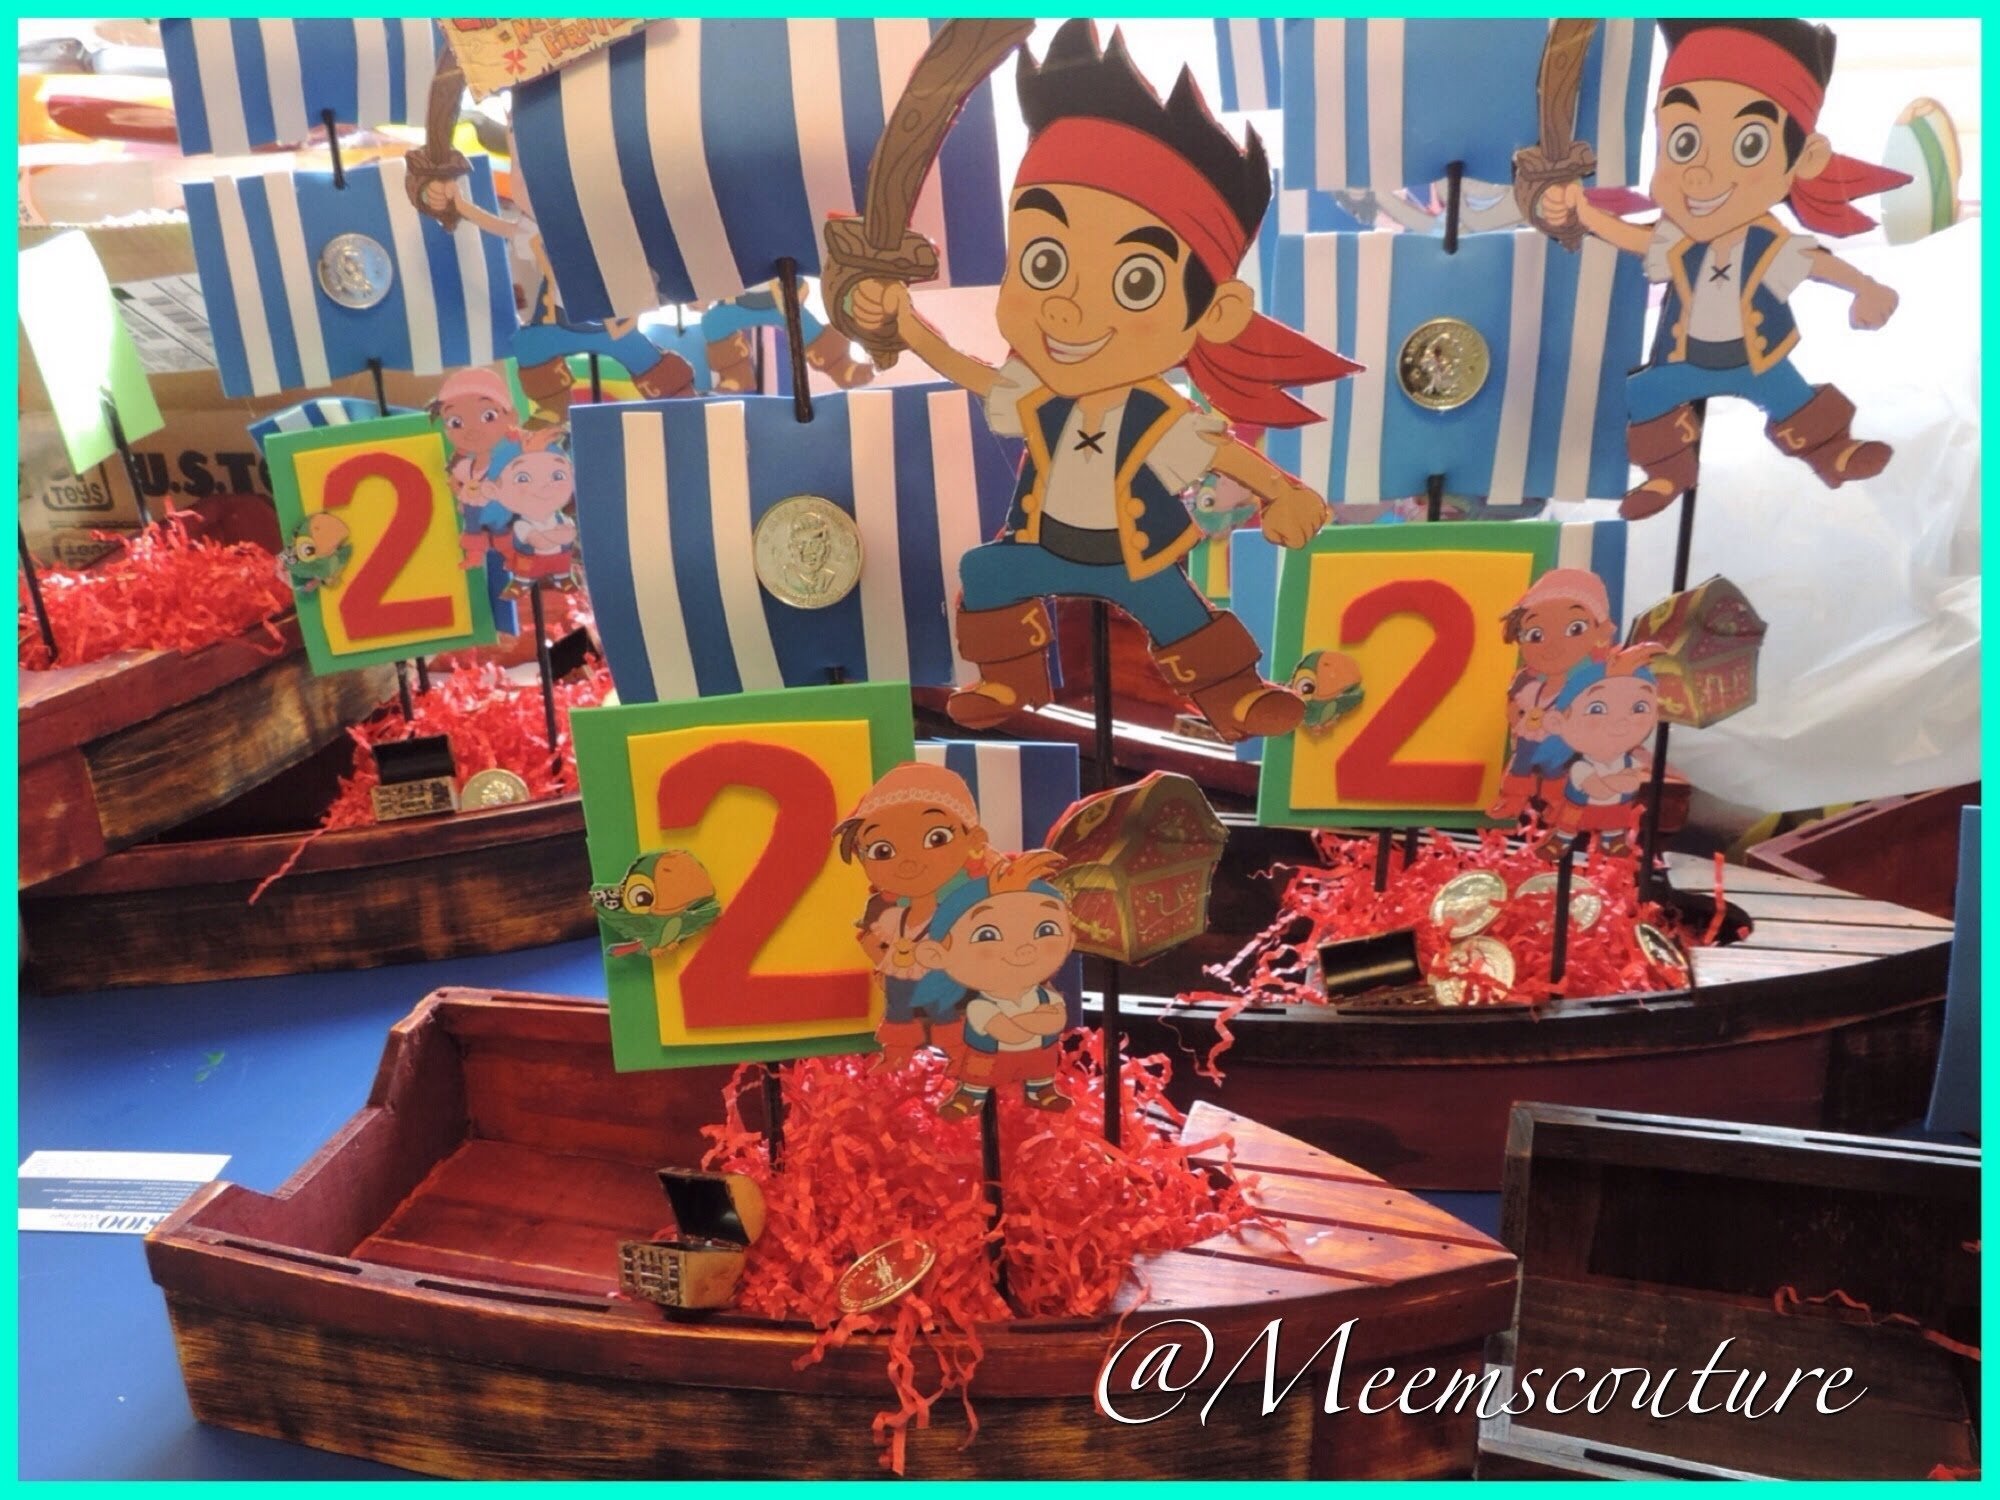 10 Gorgeous Jake And Neverland Pirates Party Ideas diy jake and the neverland pirates party center pieces youtube 6 2022